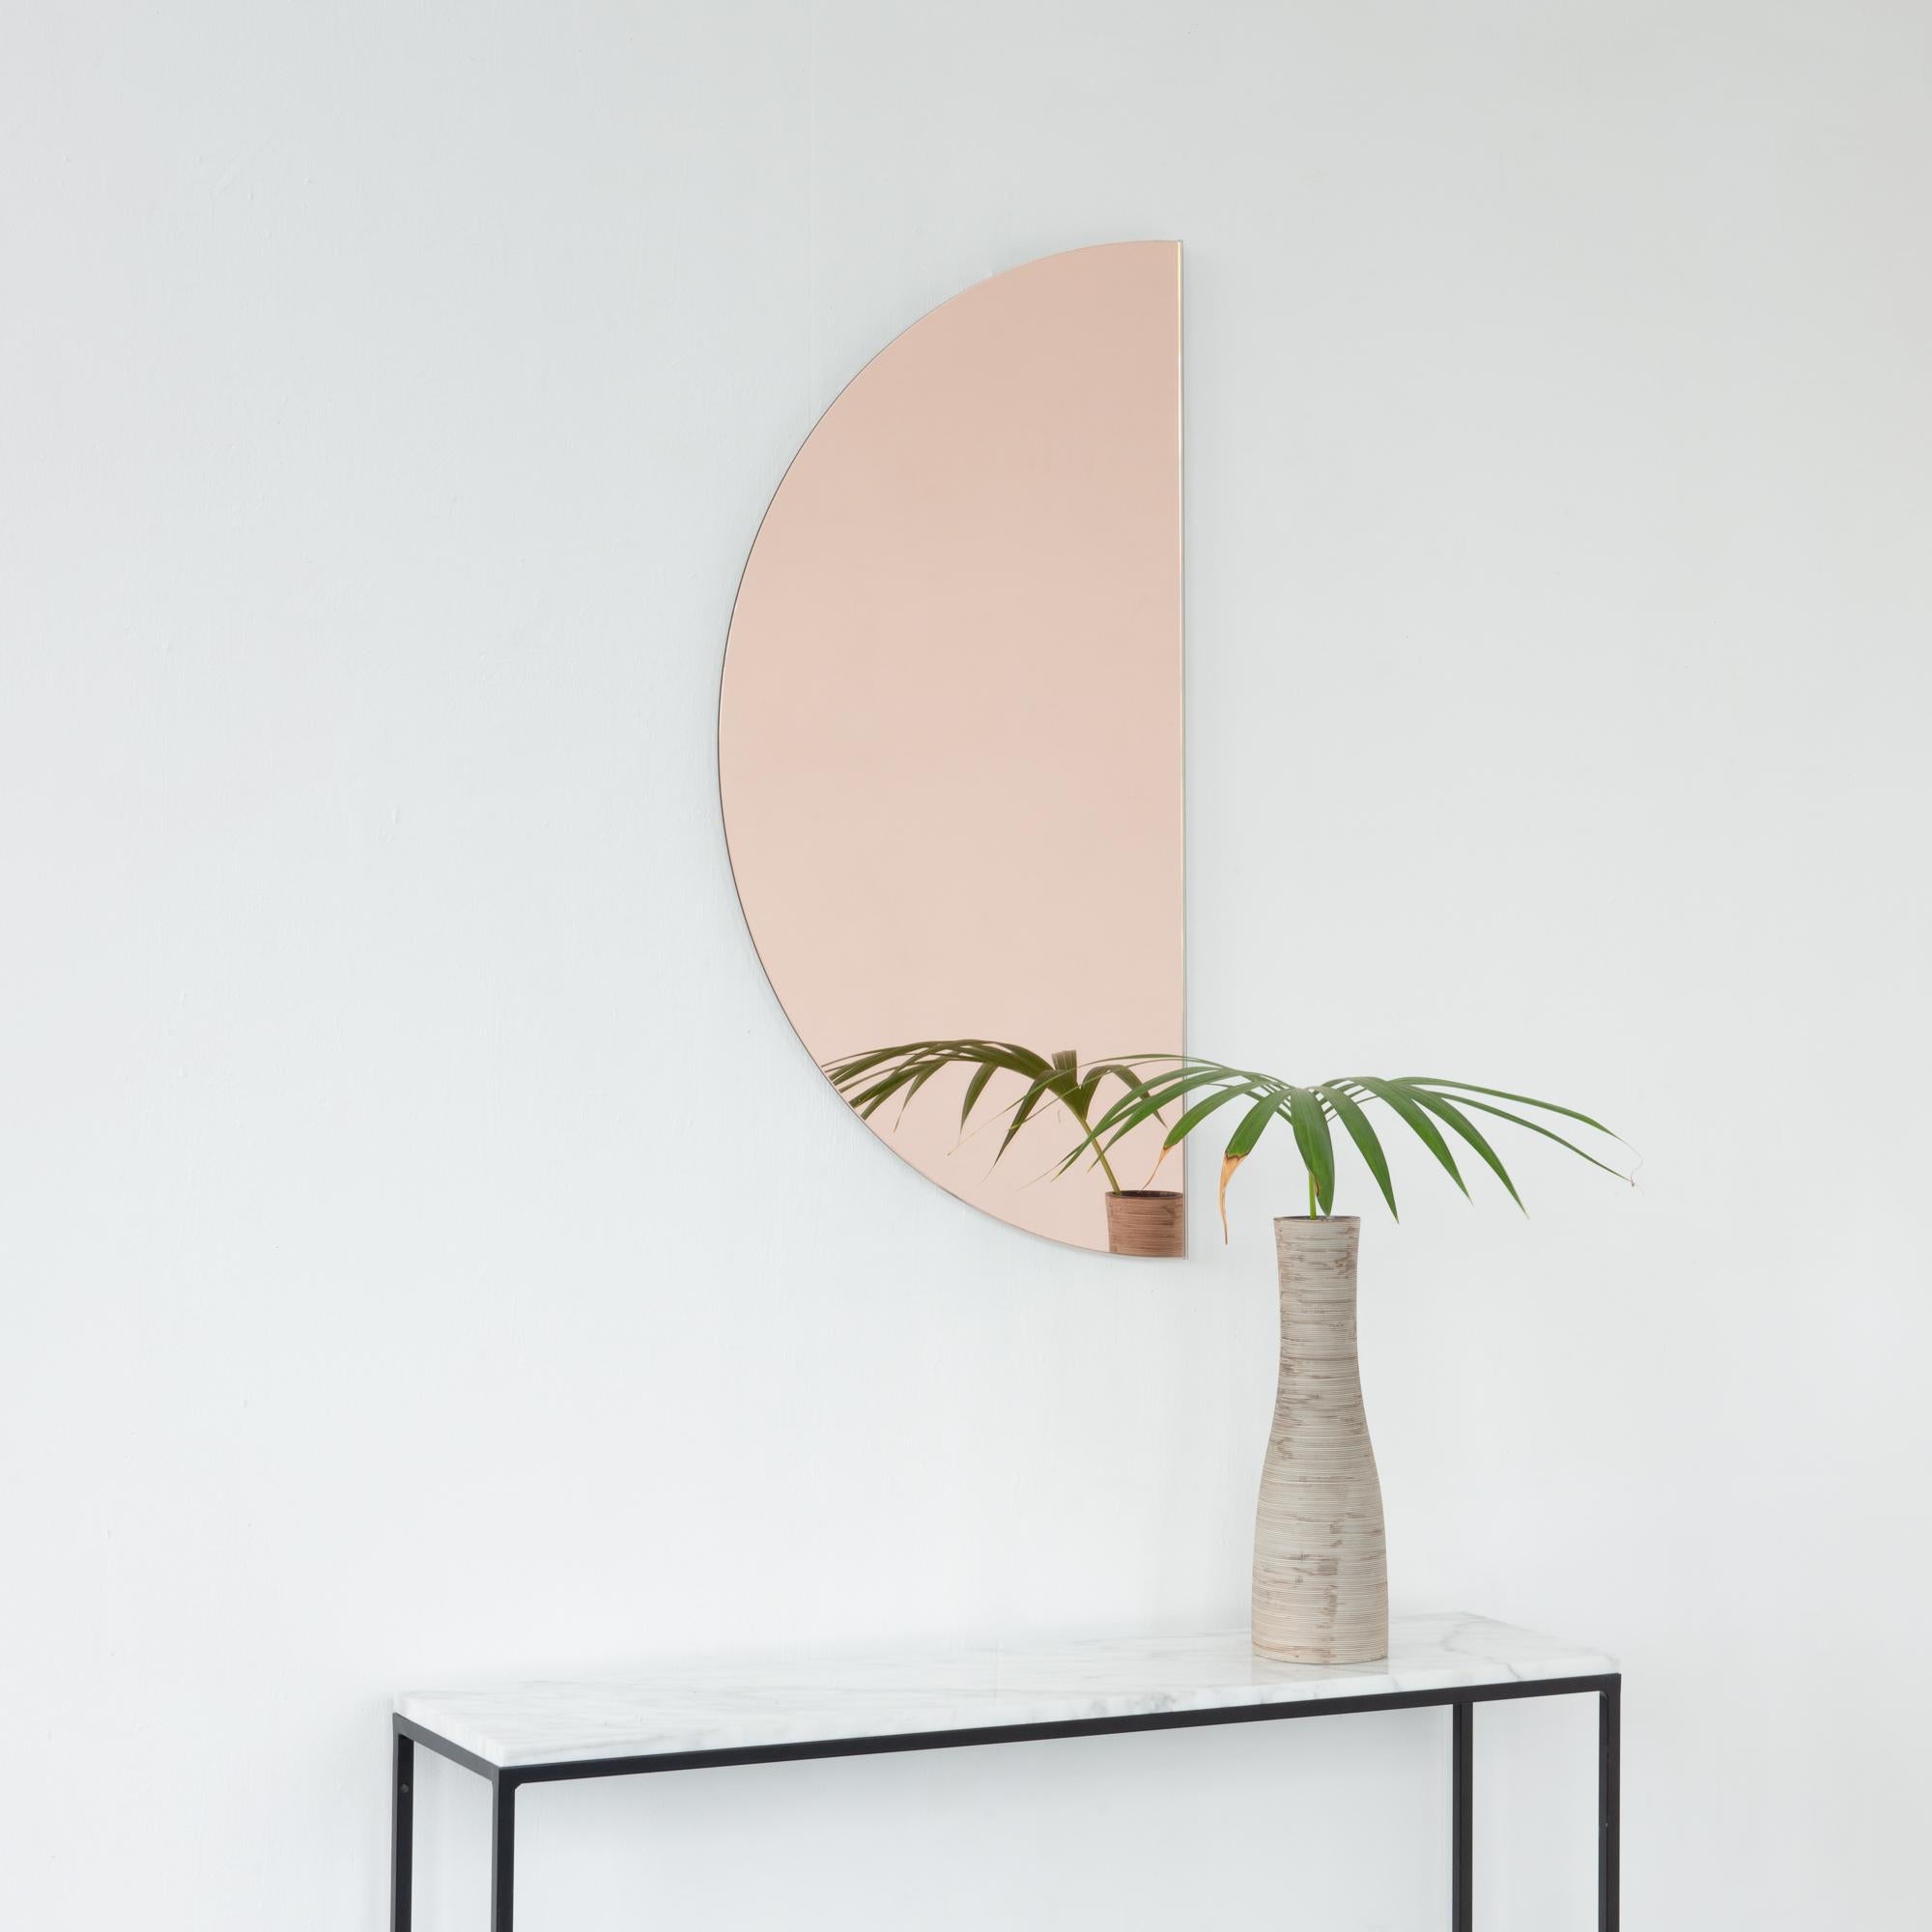 NEW DESIGN

Minimalist half-moon rose gold (peach) tinted frameless mirror with a floating effect. Fitted with a quality and ingenious hanging system for a flexible installation in 4 different directions. Designed and made in London, UK. 

The